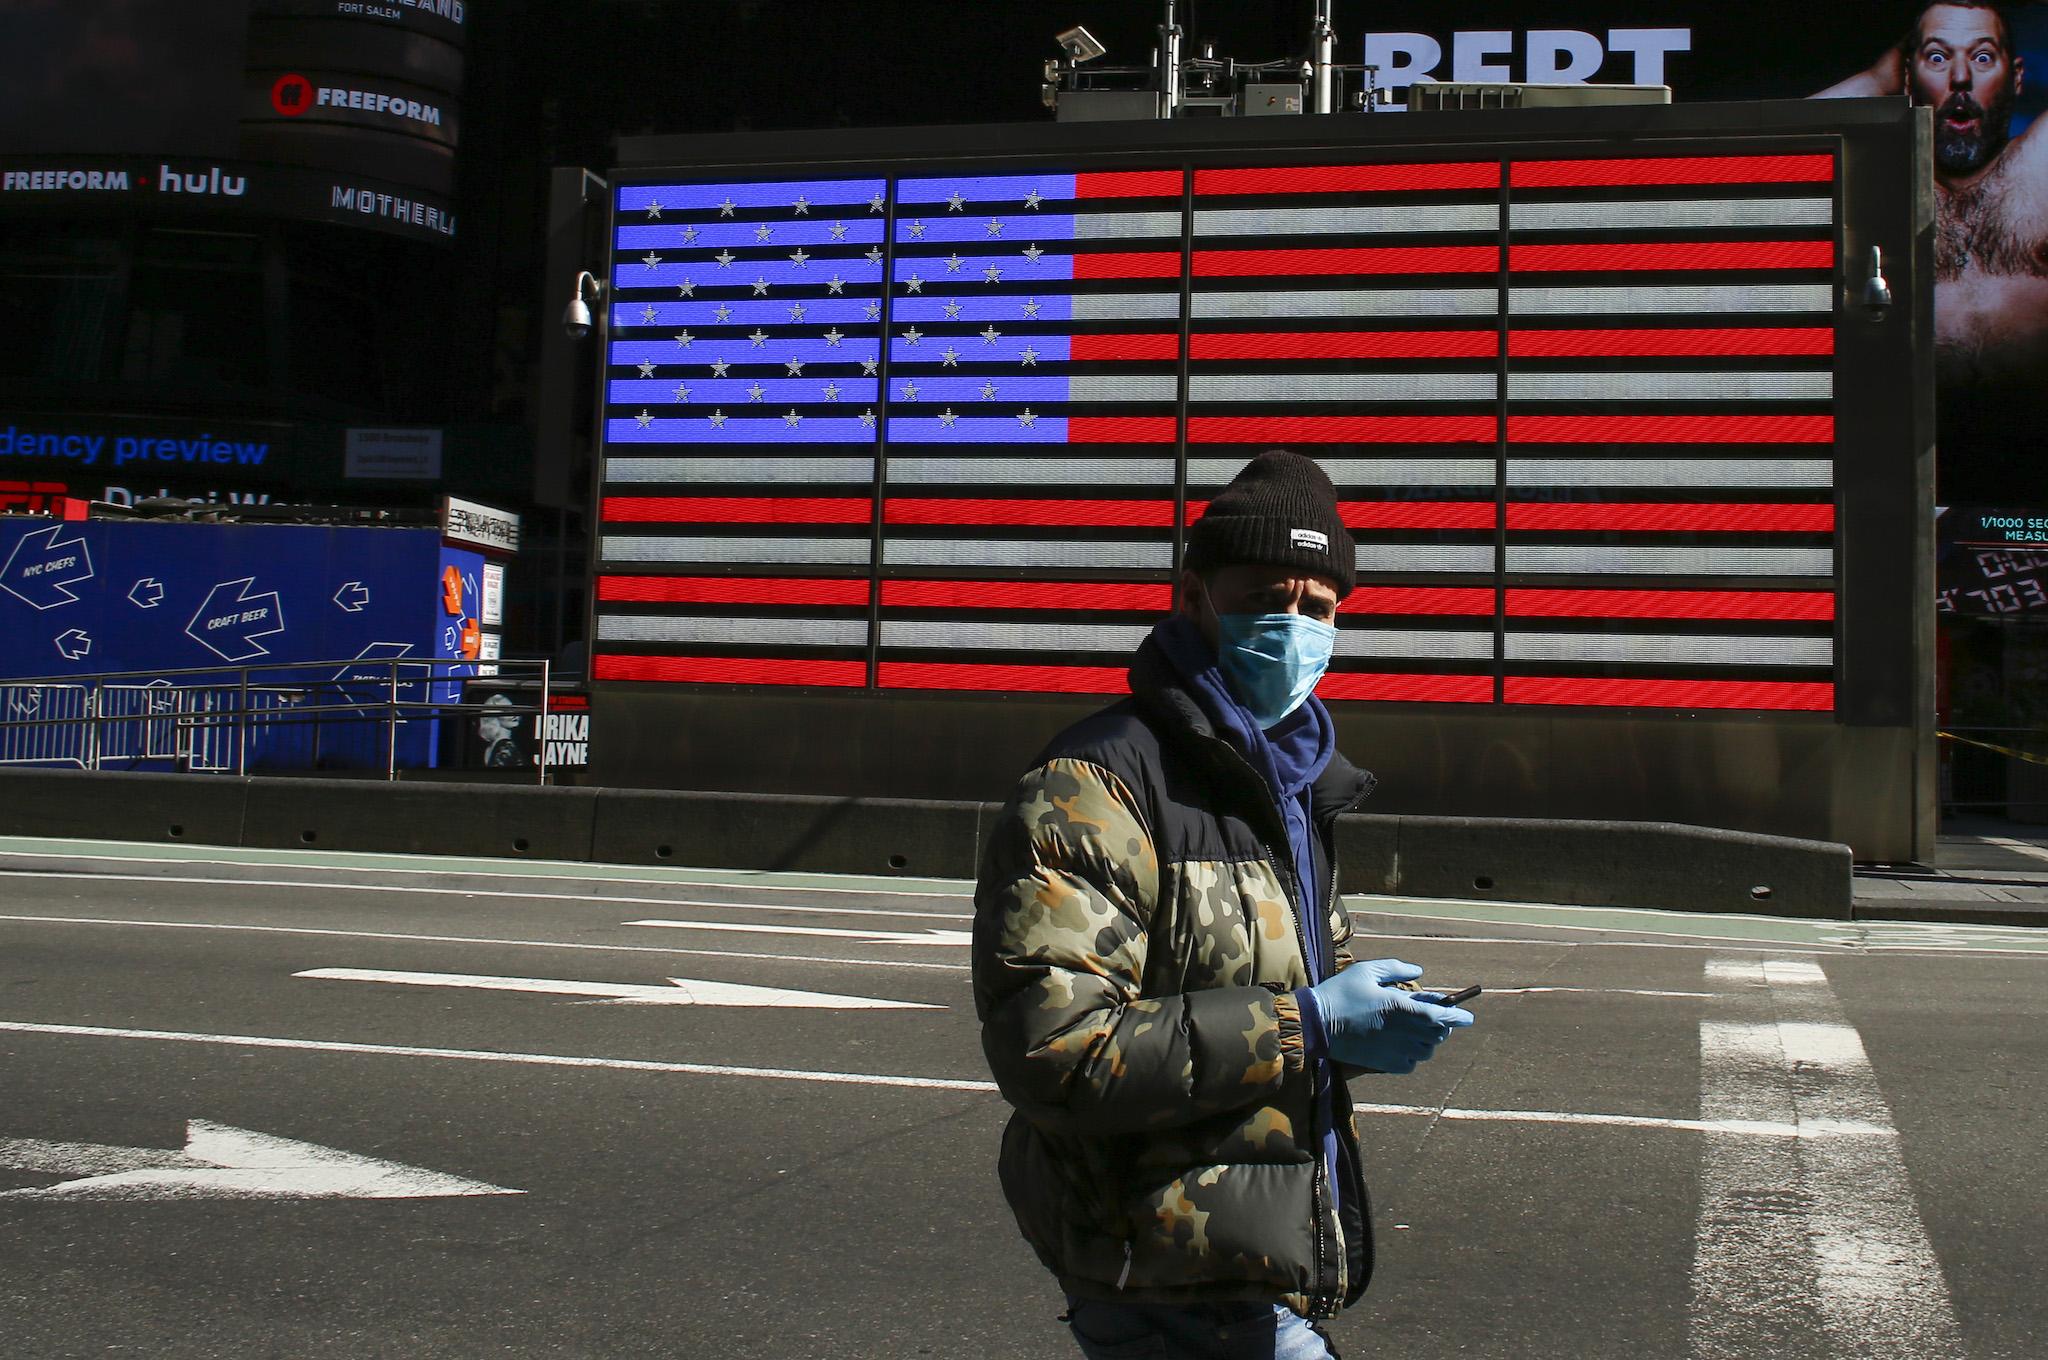 A man wears a face mask as he check his phone in Times Square on March 22, 2020 in New York City